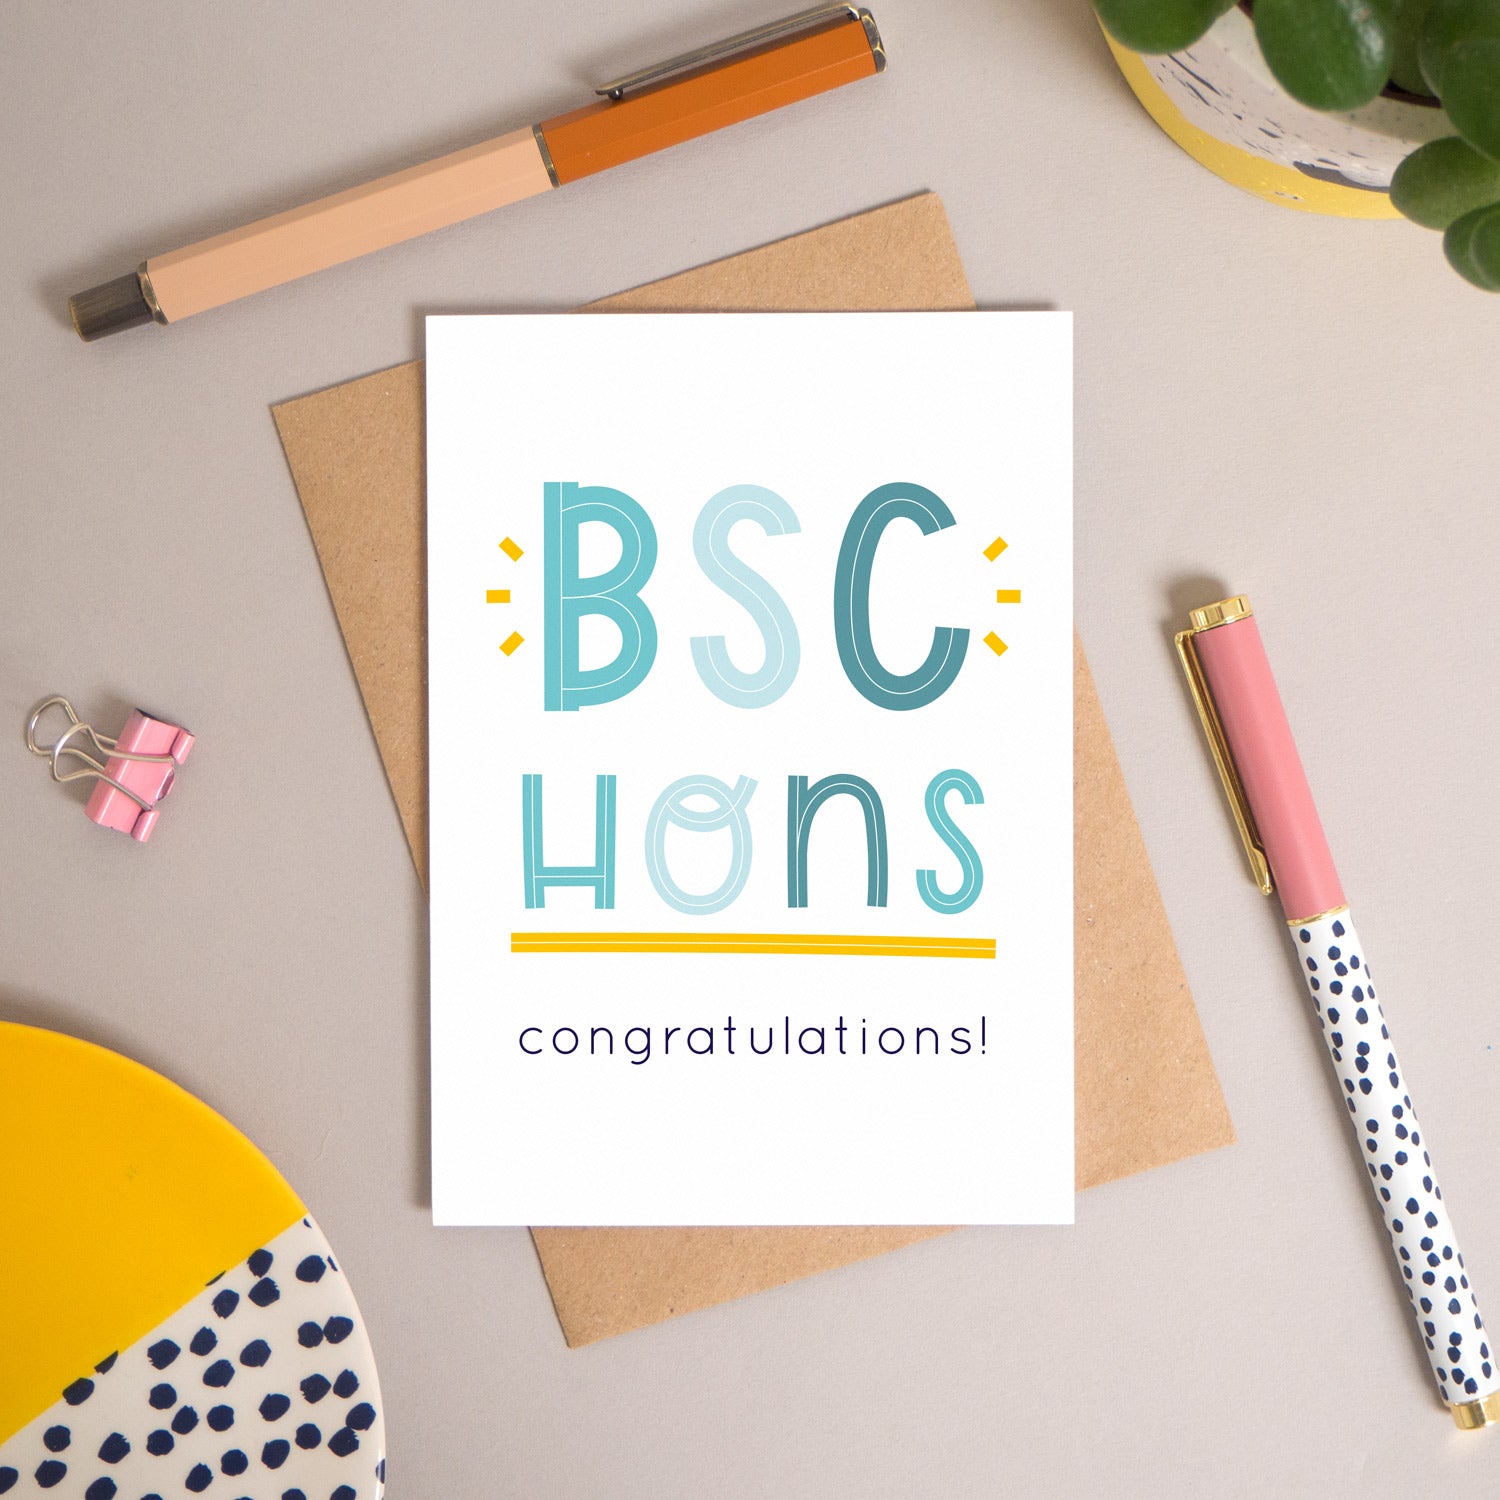 This BSc Hons graduation congratulations card has been shot flatlay style looking directly over the top of the card. It is lying flat on it’s kraft brown envelope, on a warm grey background. Surrounding the card are pens, a clip, a plant and a trinket dish. This version of the card is in varying tones of navy and blue.